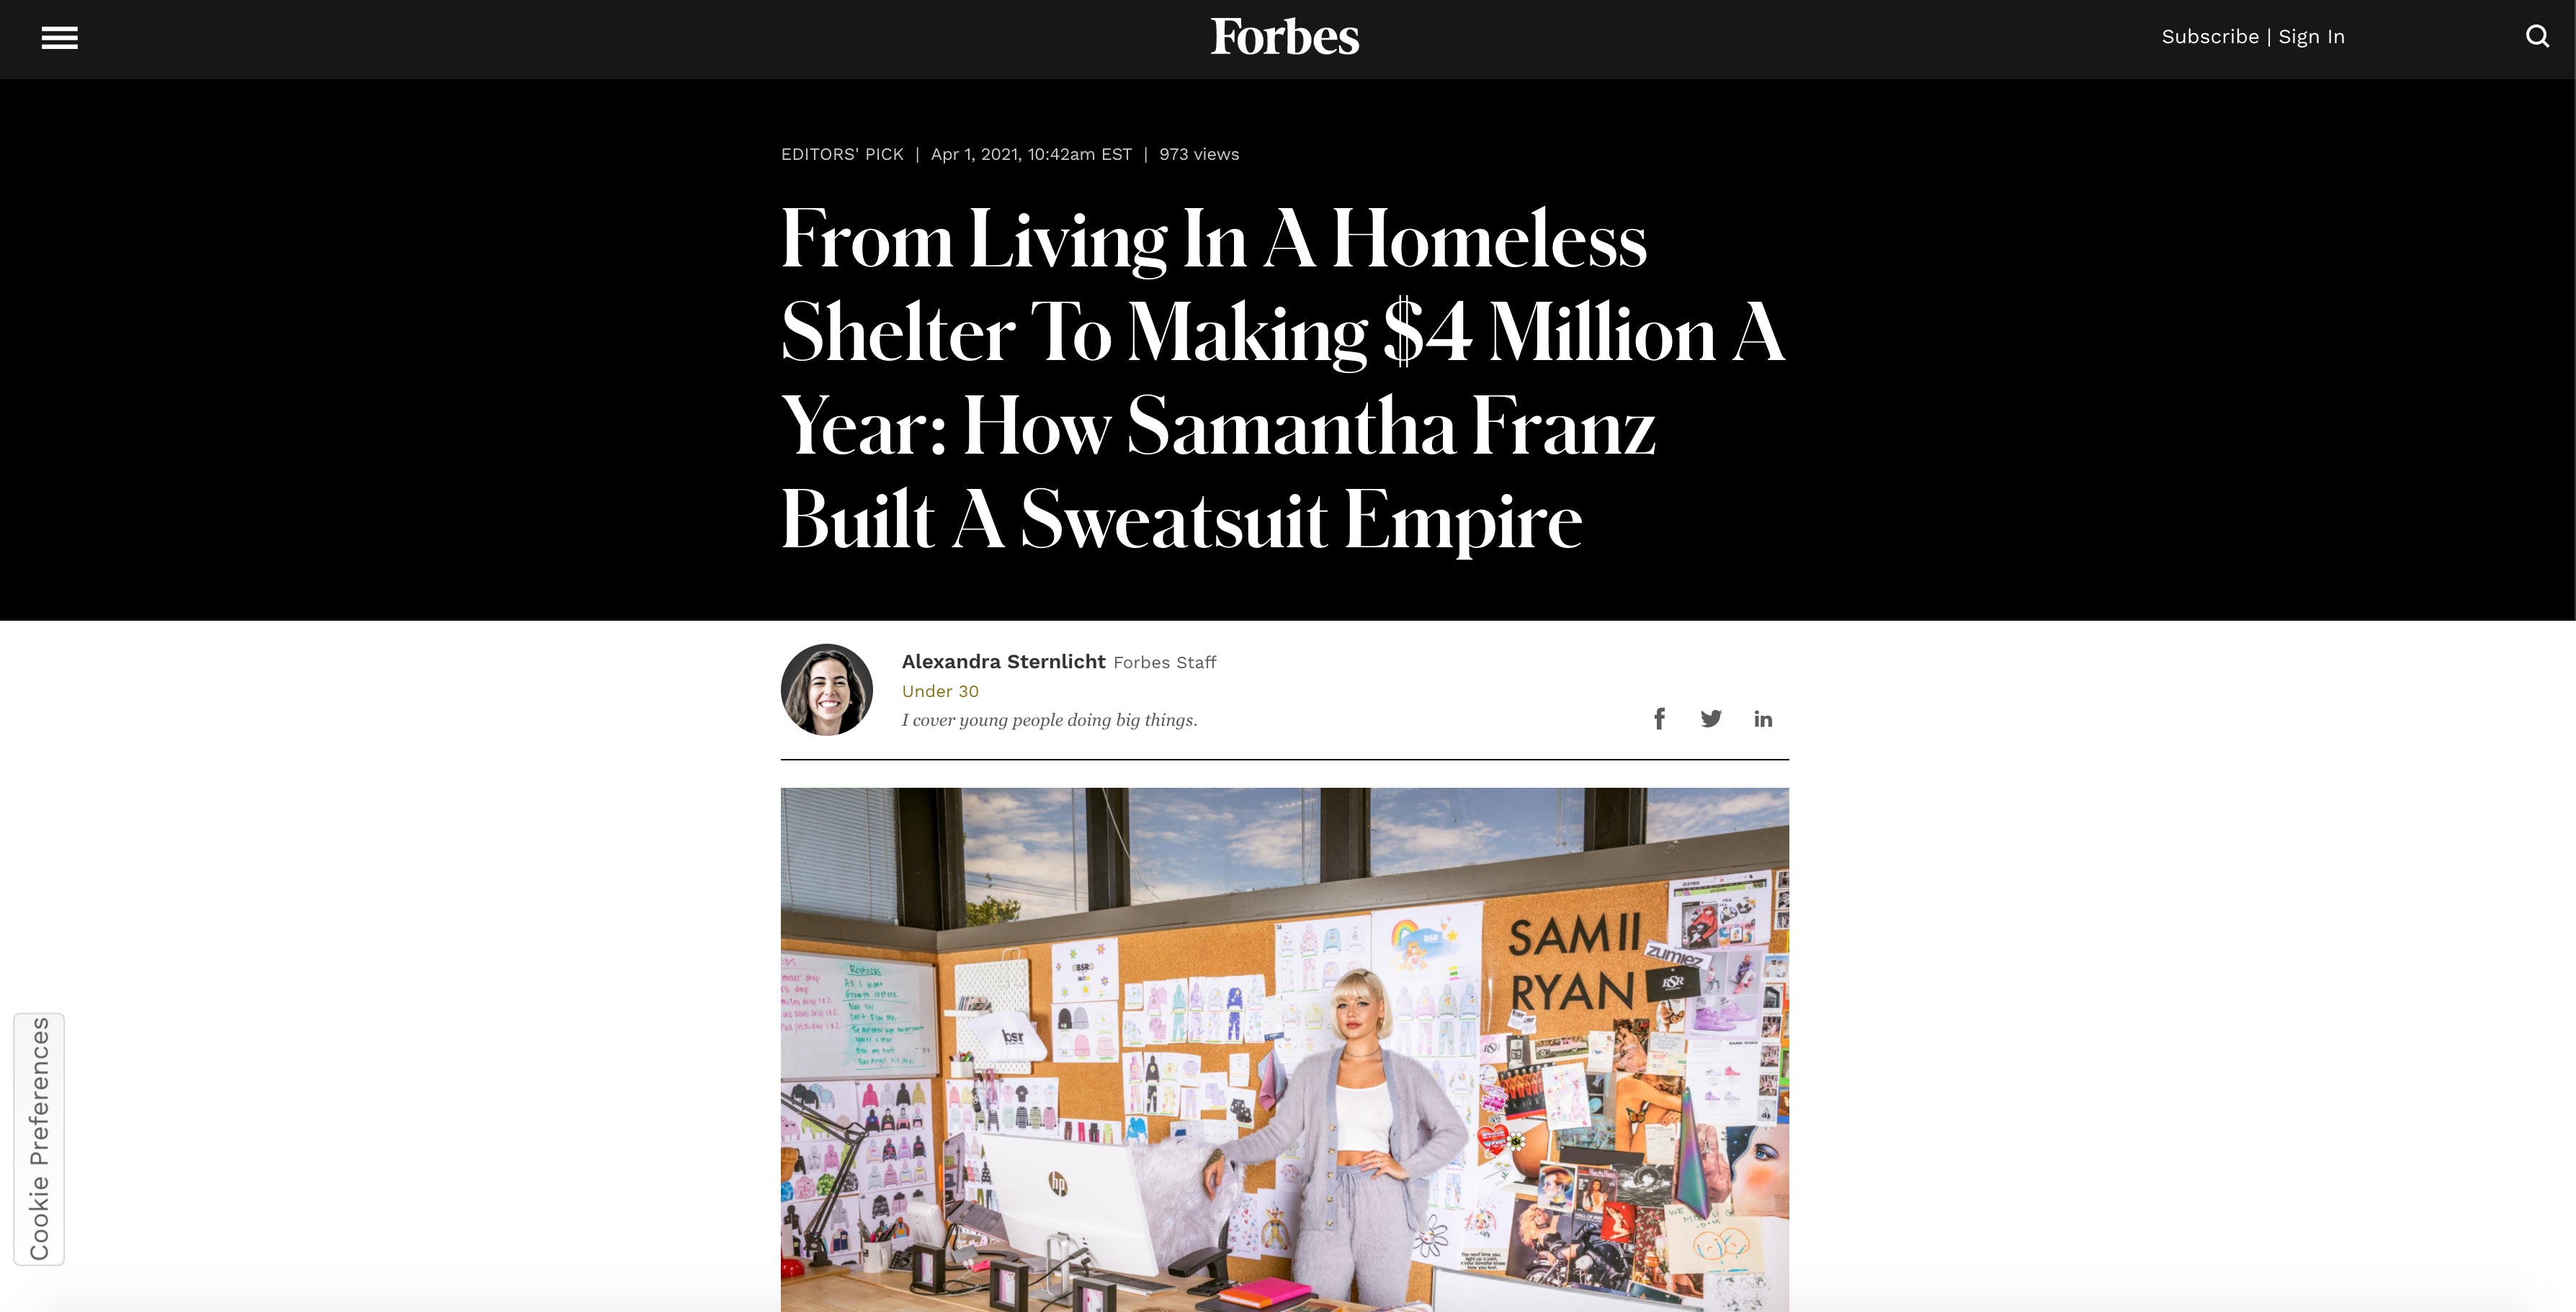 Founder Featured in Forbes